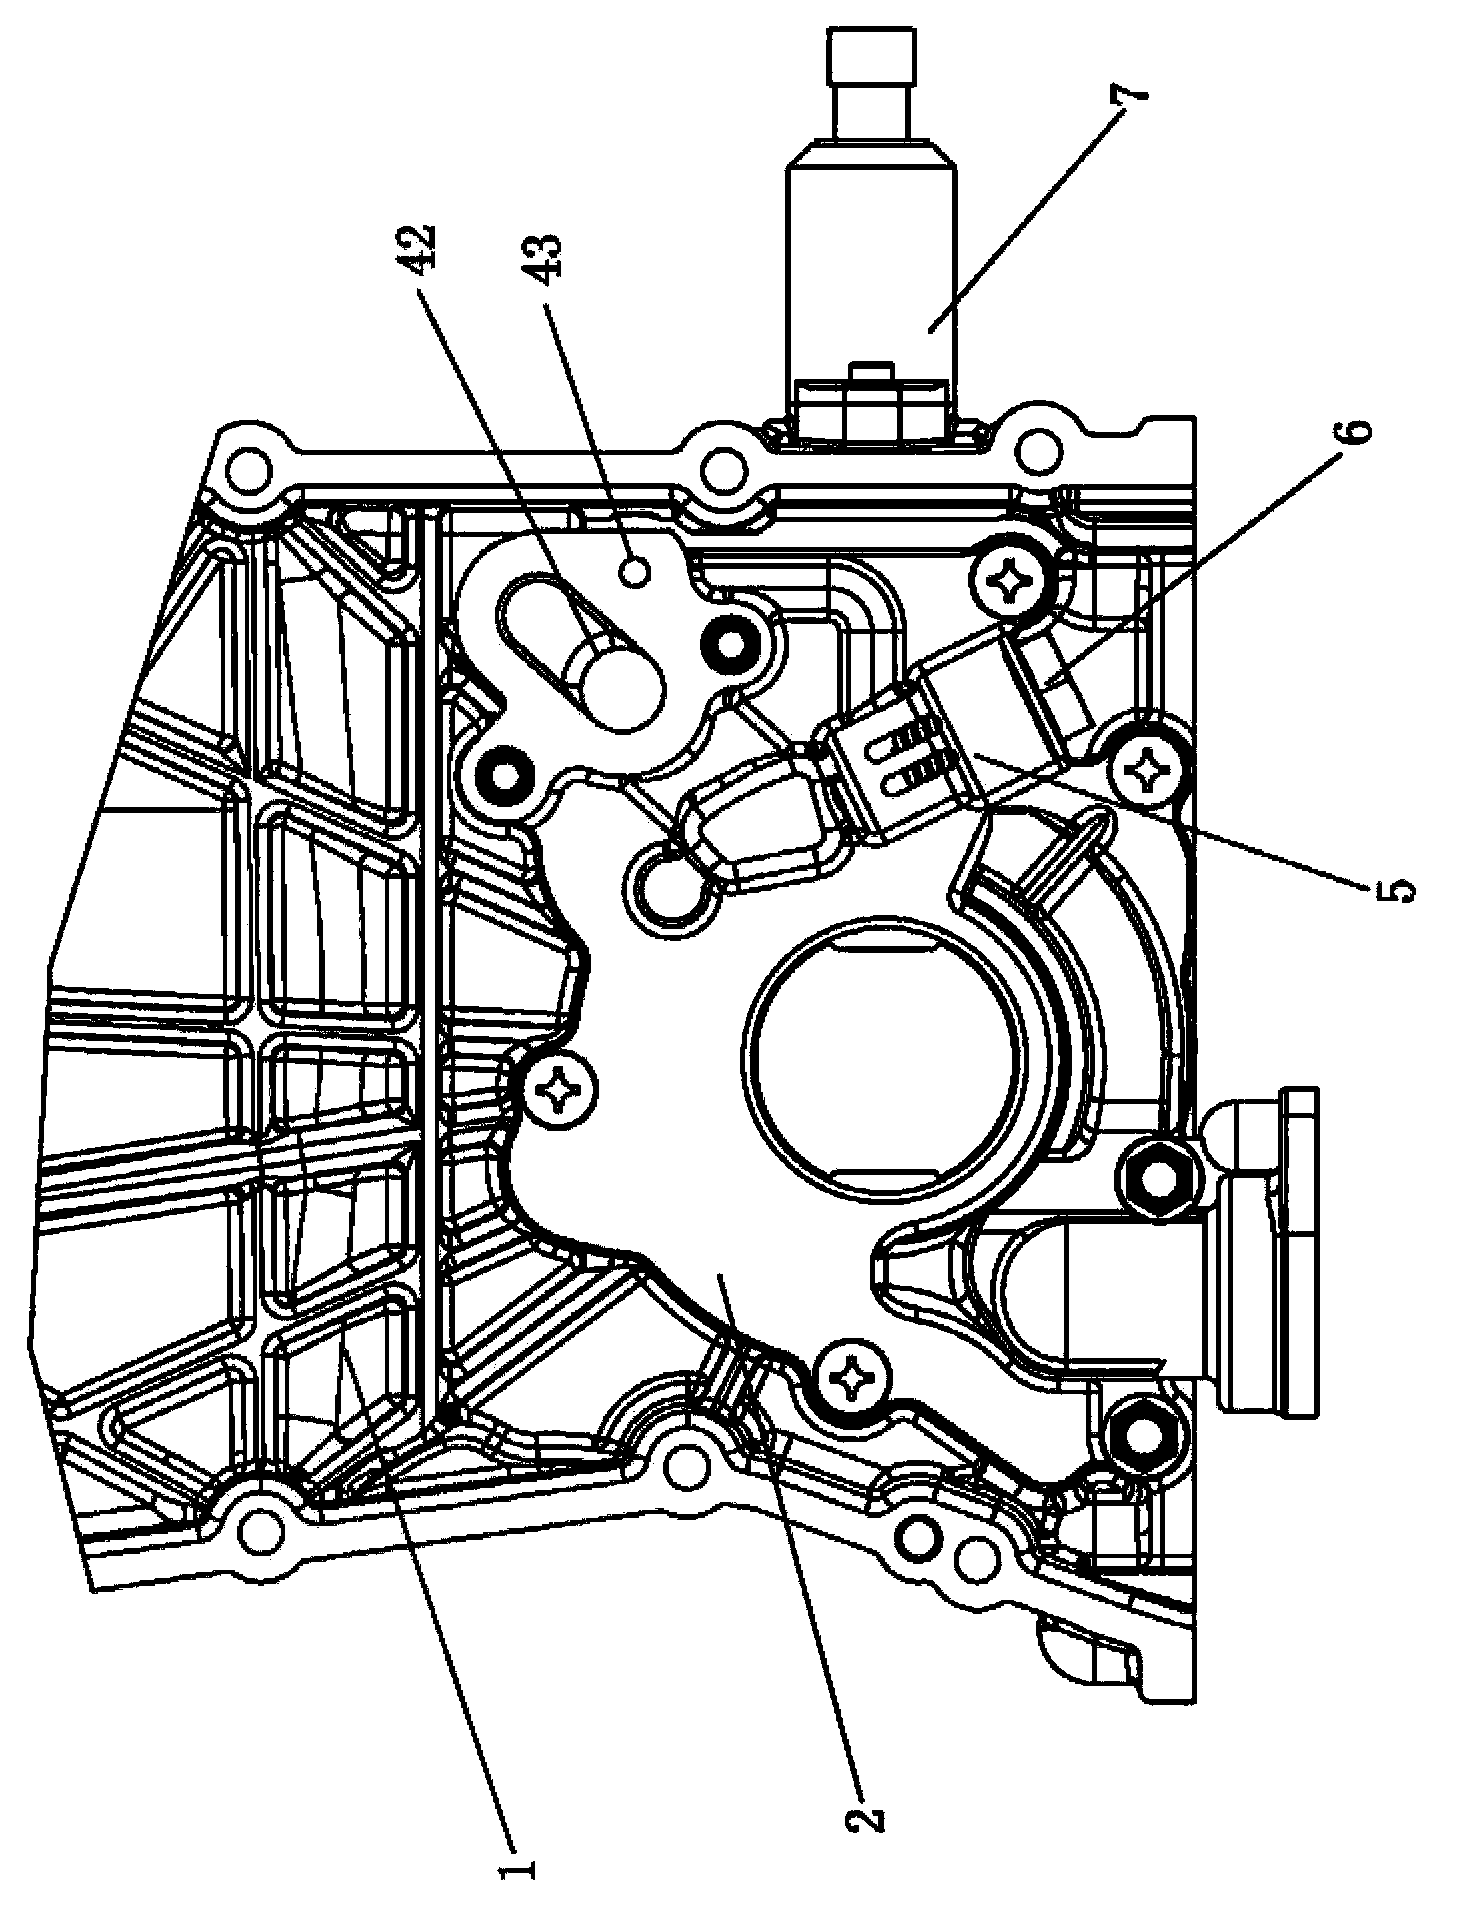 Oil pump with variable displacement